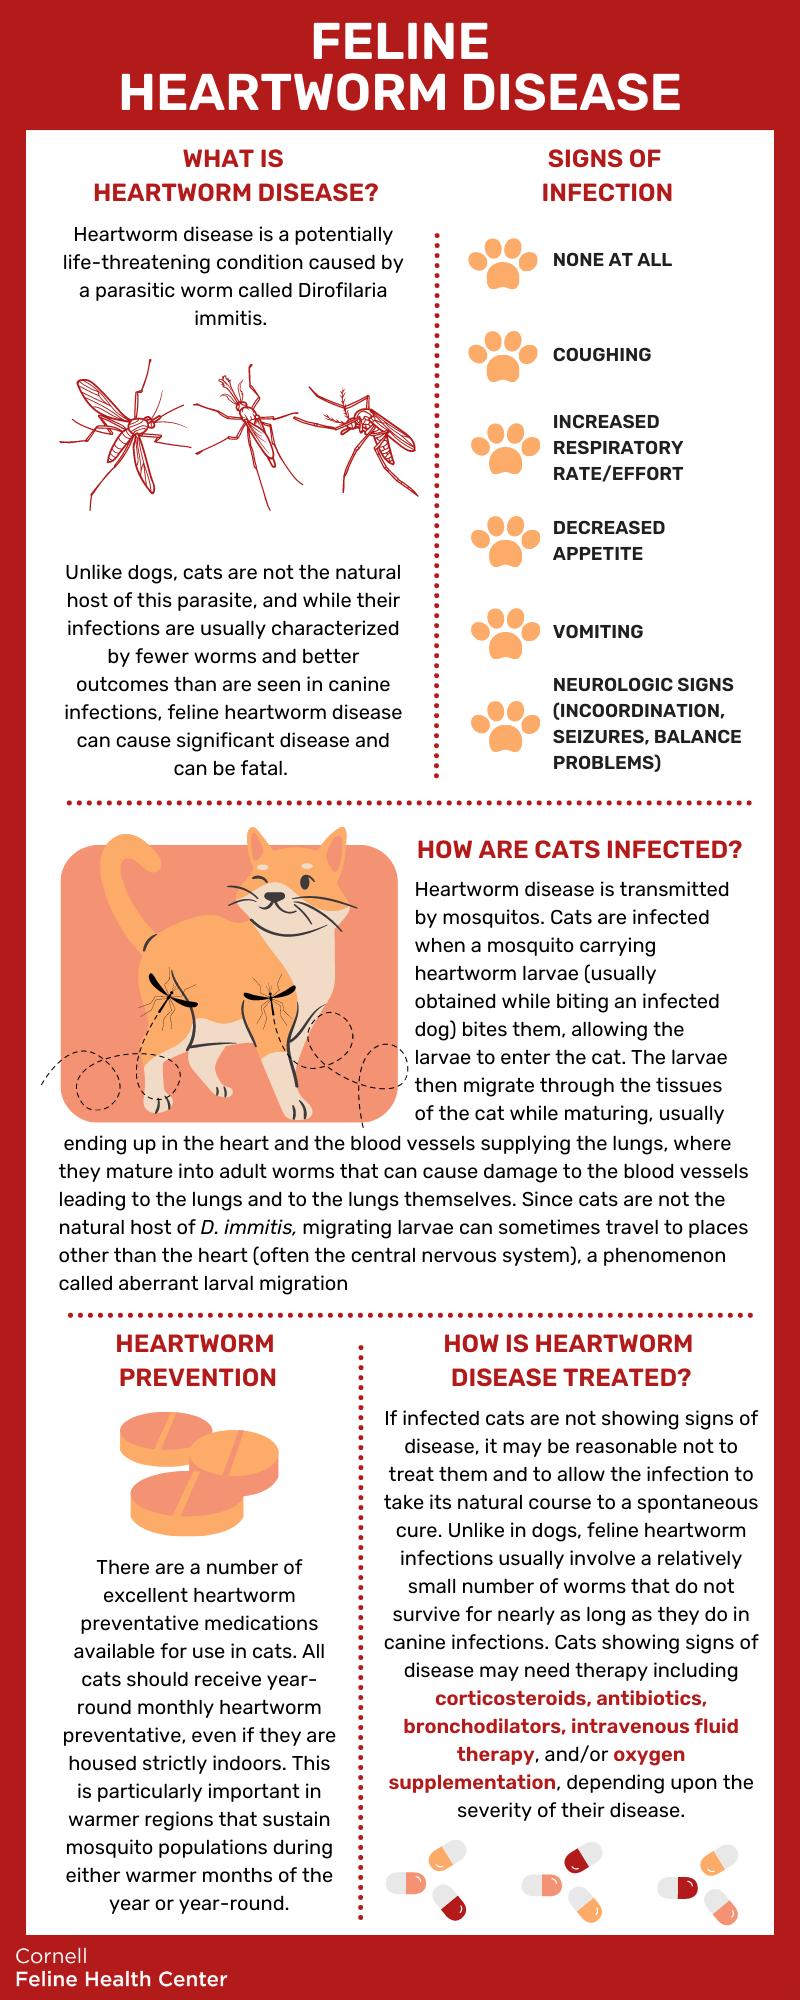 Image of the Cornell Feline Health Center infographic on feline heartworm disease. An accessible PDF link is below the image. 